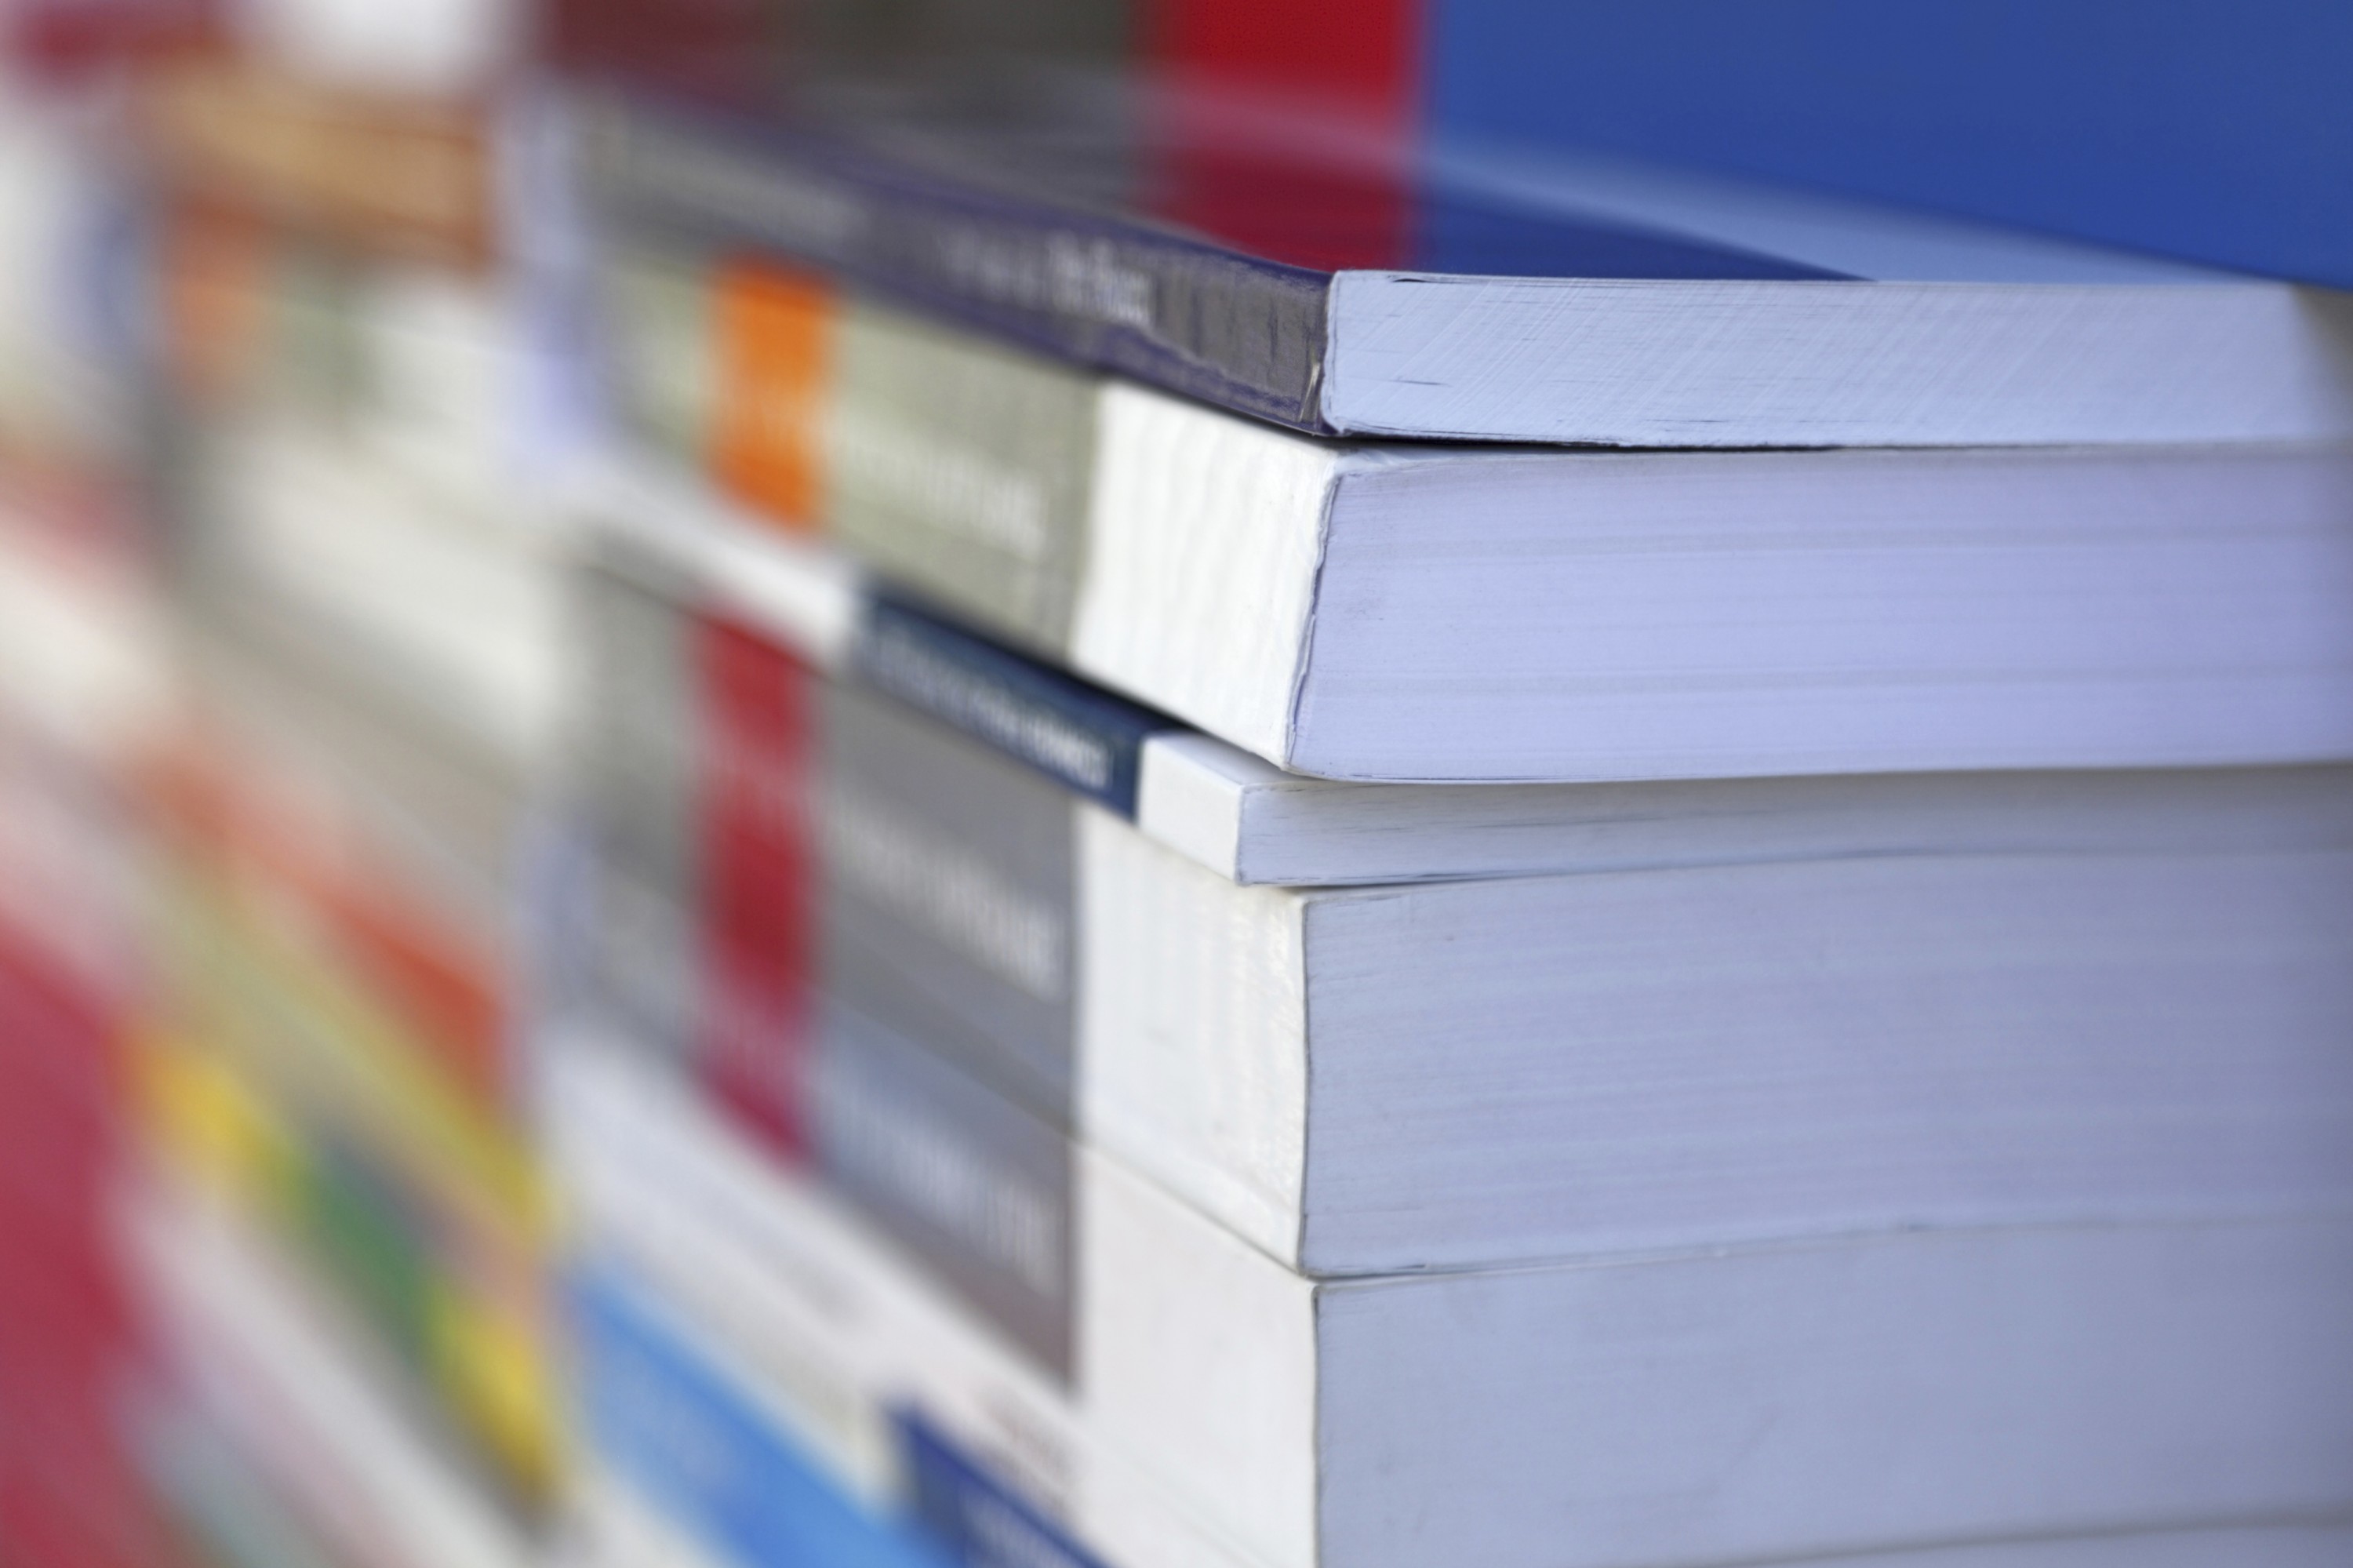 Abstract image of textbooks at a bookstore. (iStock Photo)